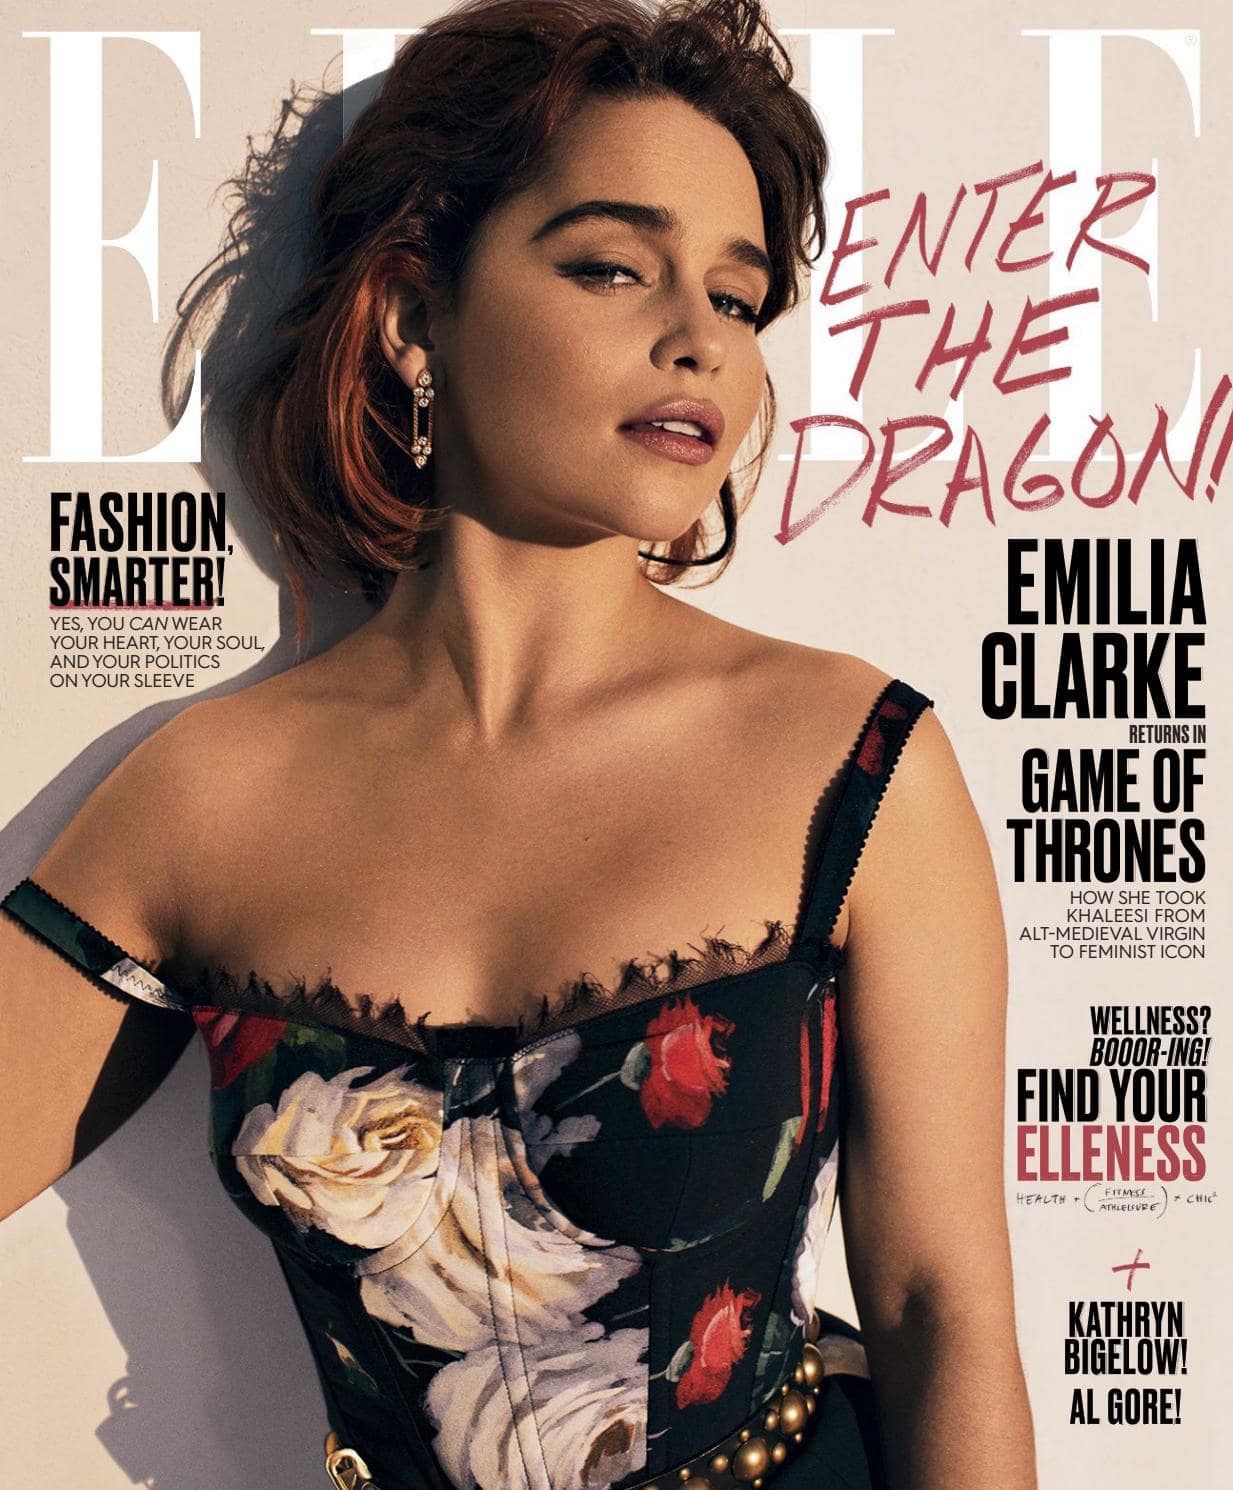 38 Hottest Emilia Clarke Bikini And Lingerie Pictures Will Want Her Now | Best Of Comic Books